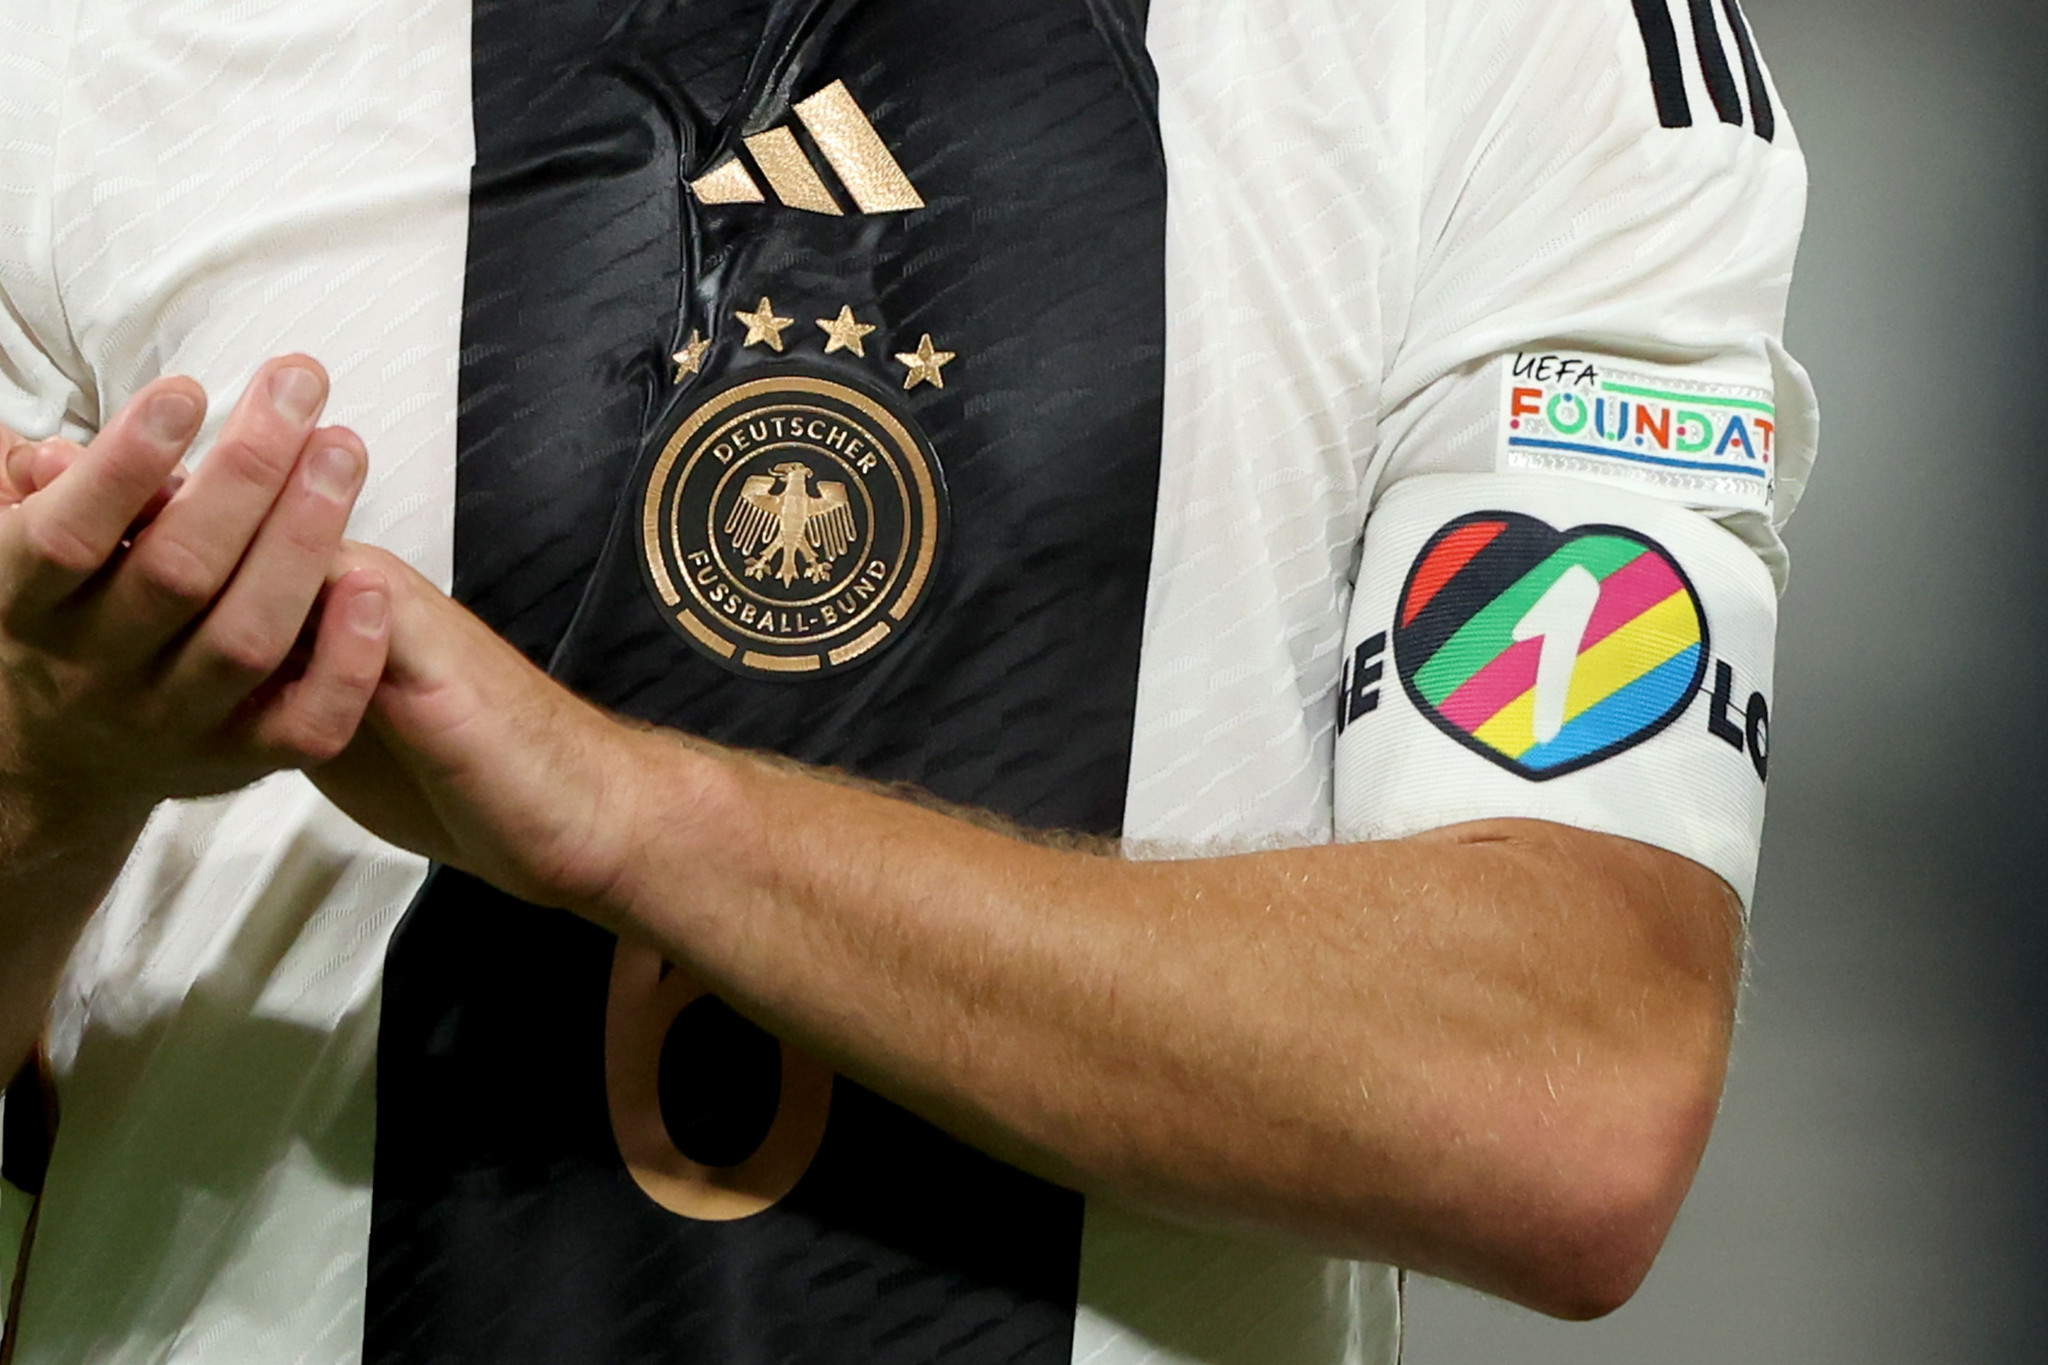 Nations back down from wearing "OneLove" armband at World Cup after FIFA threatens punishment